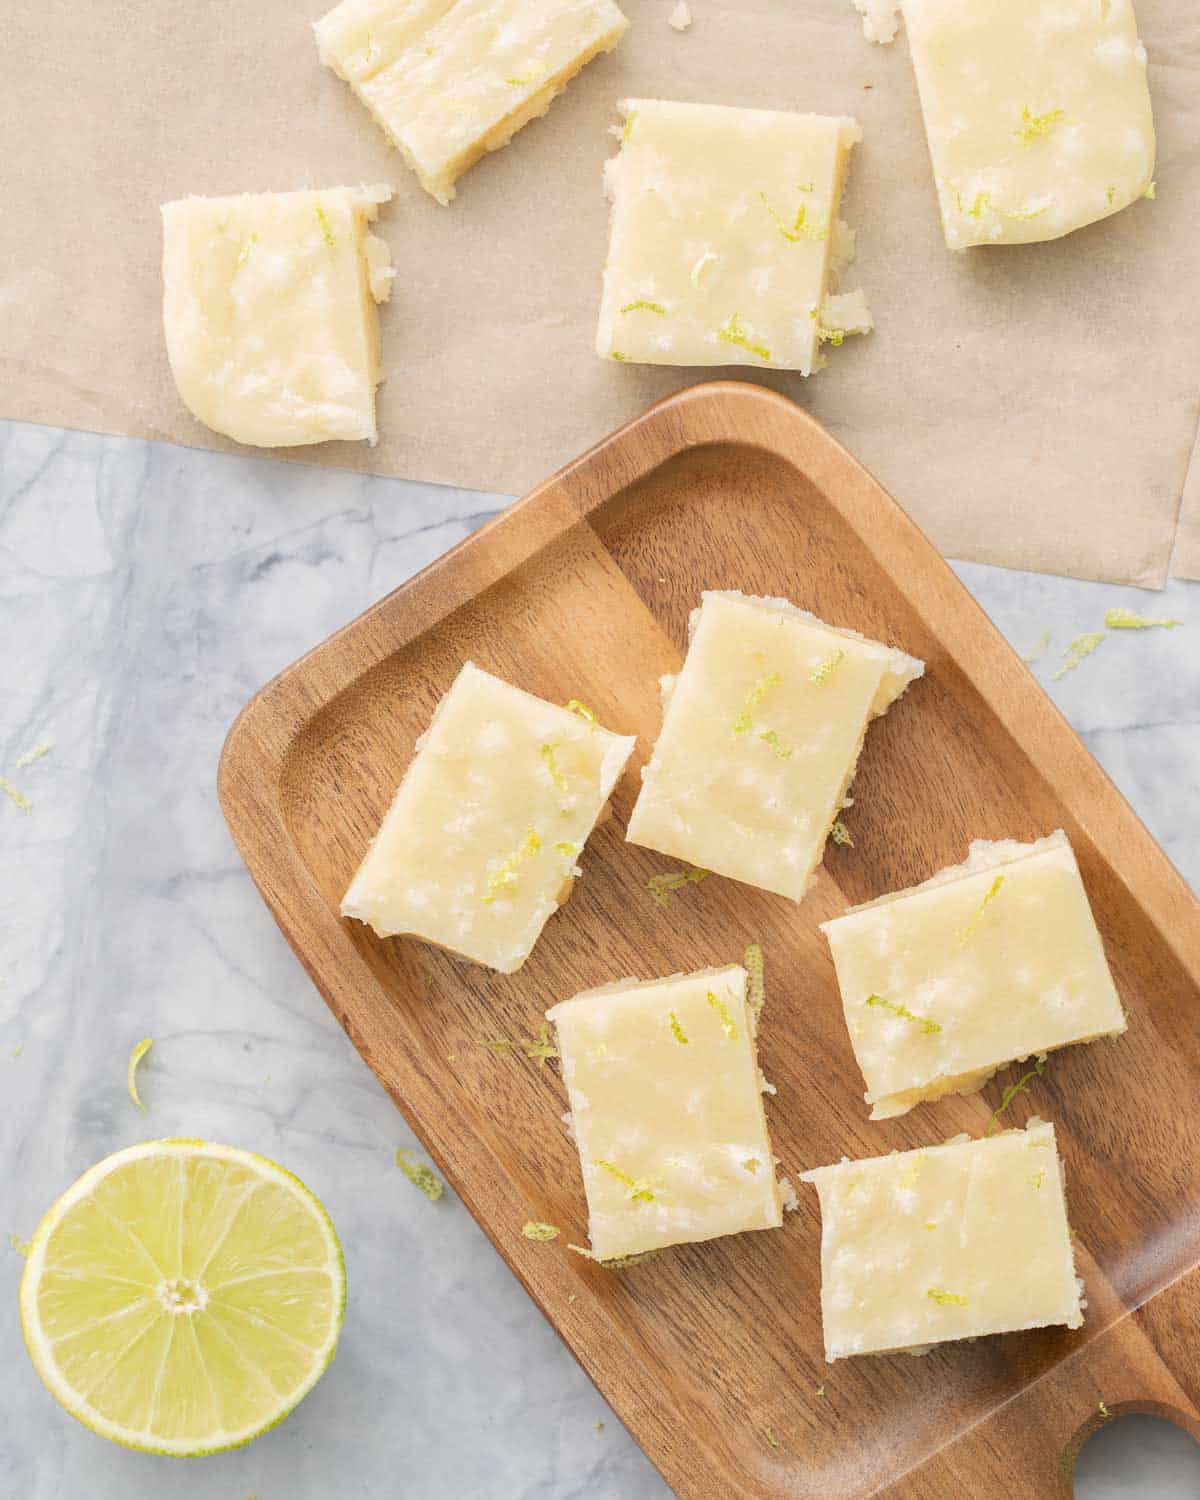 Slices of vegan fudge resting on baking paper and a wooden serving board next to a lime wedge 